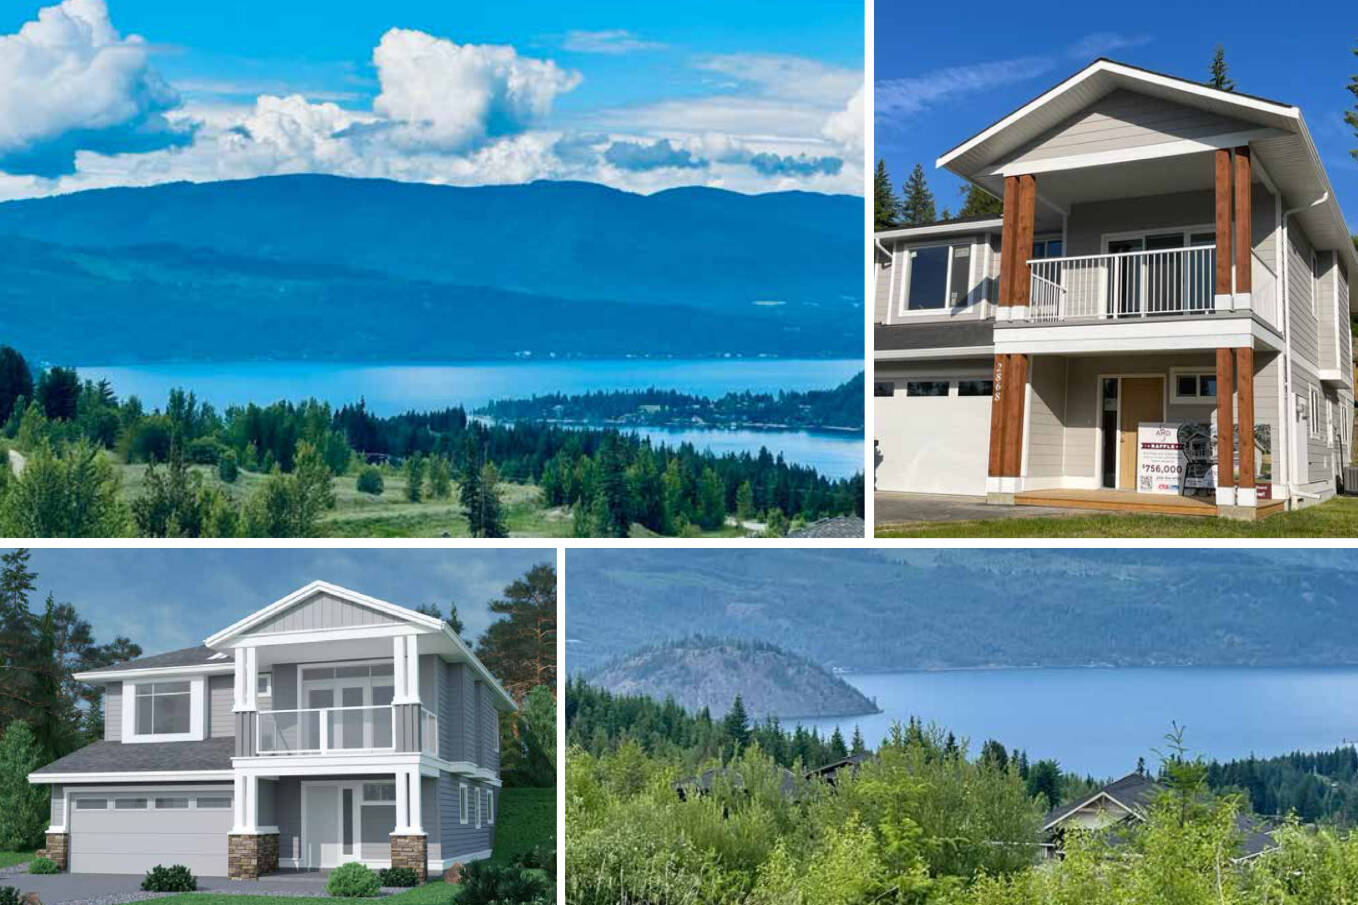 The Attainable Housing Development Society works with local communities an organizations to fill the housing gap in British Columbia. This summer, they’re hosting their New Home Raffle – giving you the chance to win an amazing home overlooking beautiful Shuswap Lake. Photos courtesy AHDS